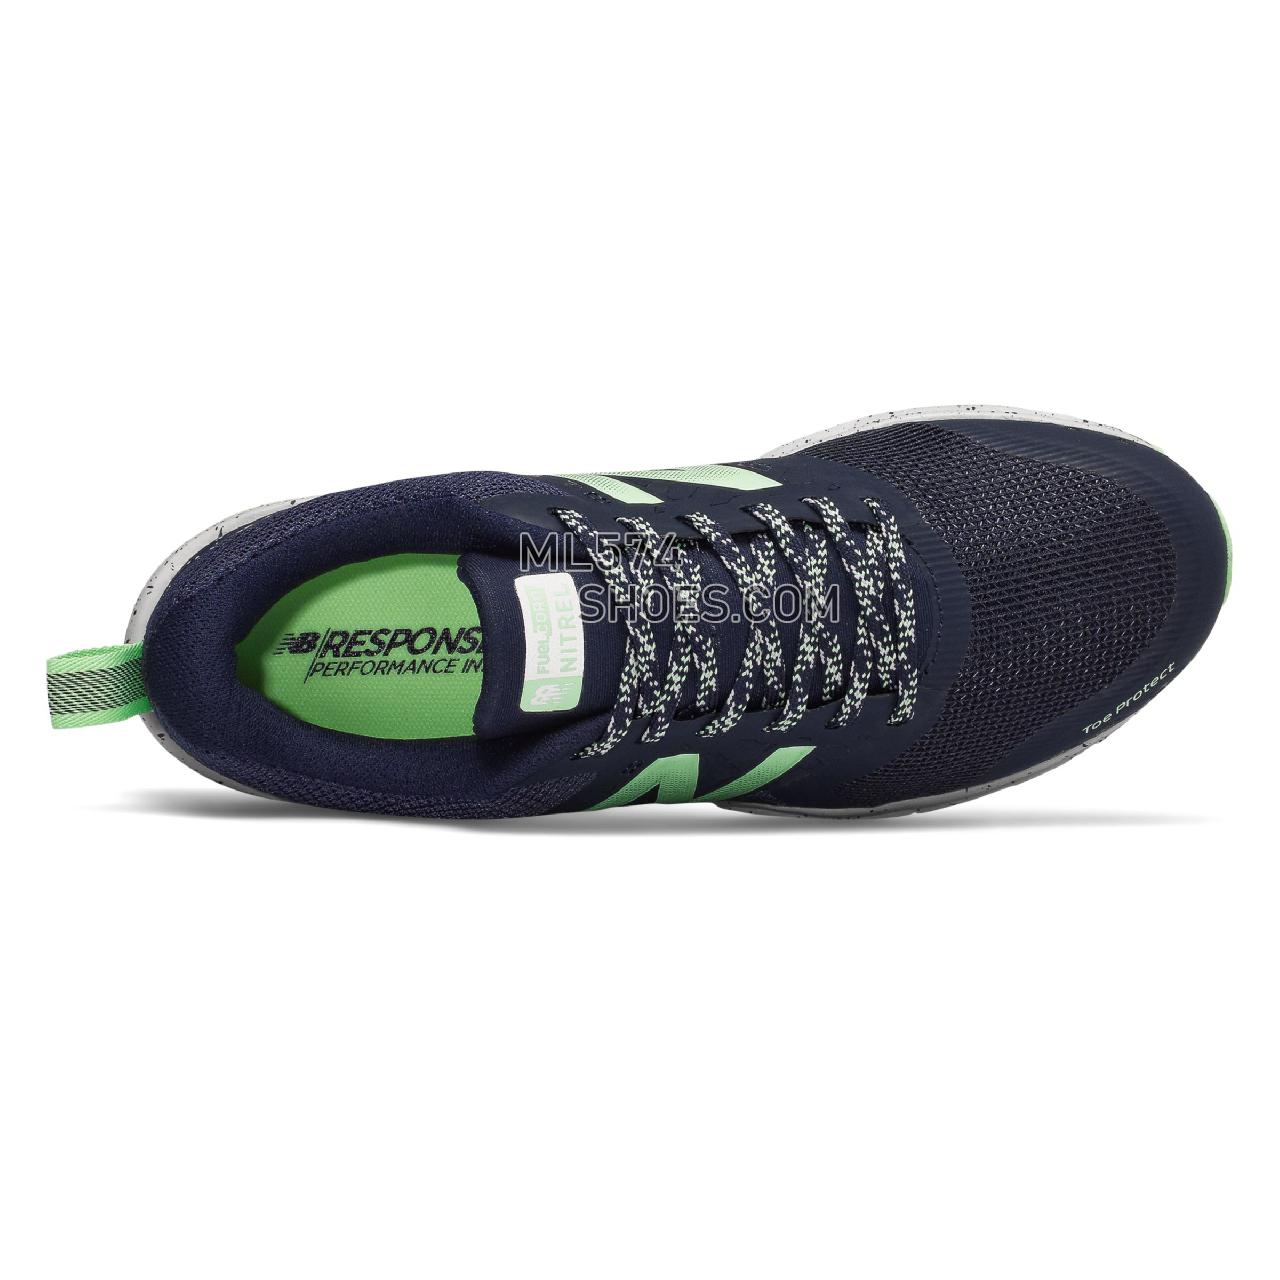 New Balance FuelCore NITREL Trail - Women's 1 - Running Pigment with Green Flash - WTNTRRP1